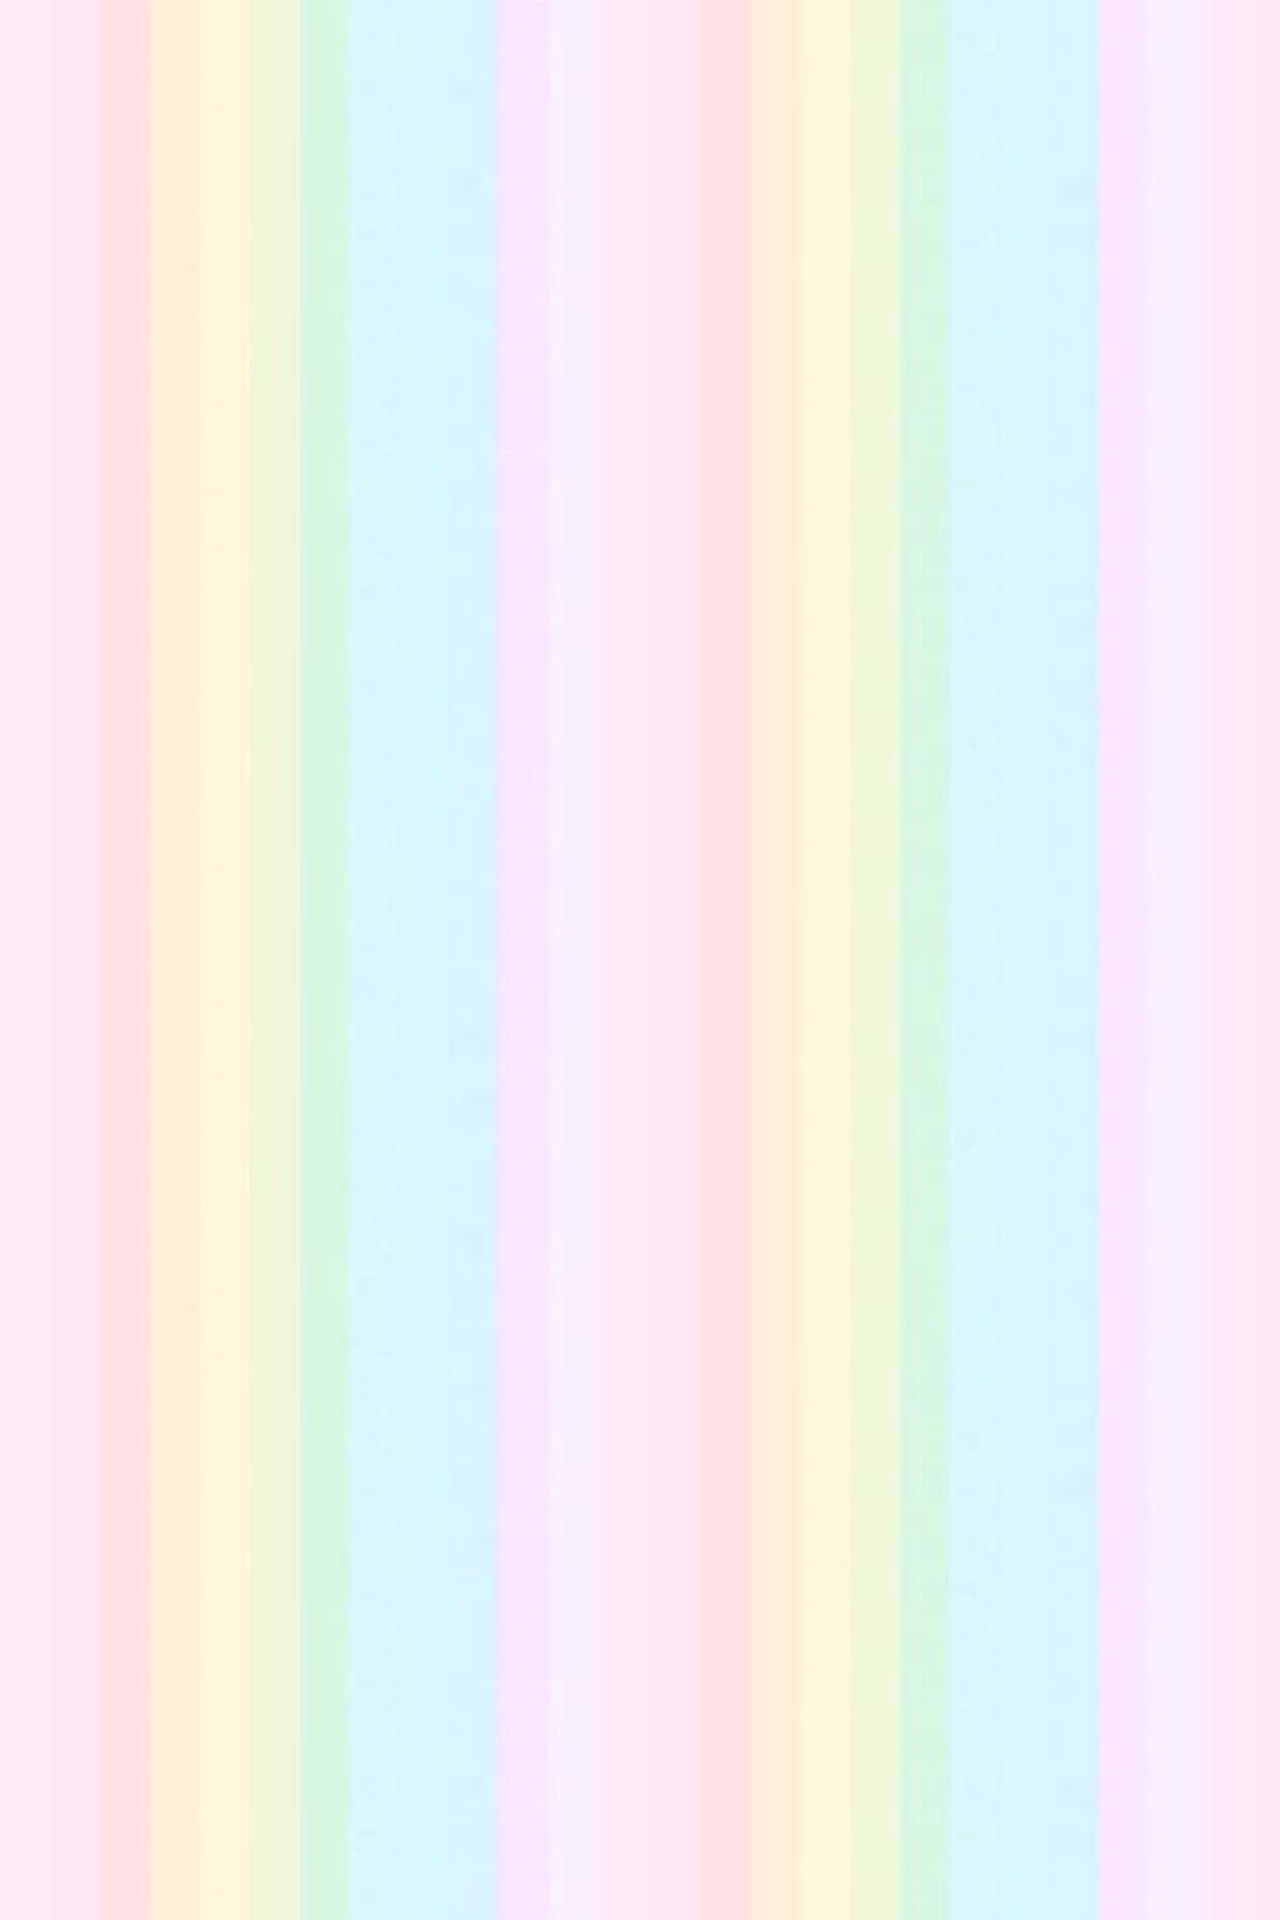 A Pastel Colored Striped Wallpaper With A Rainbow Pattern Wallpaper